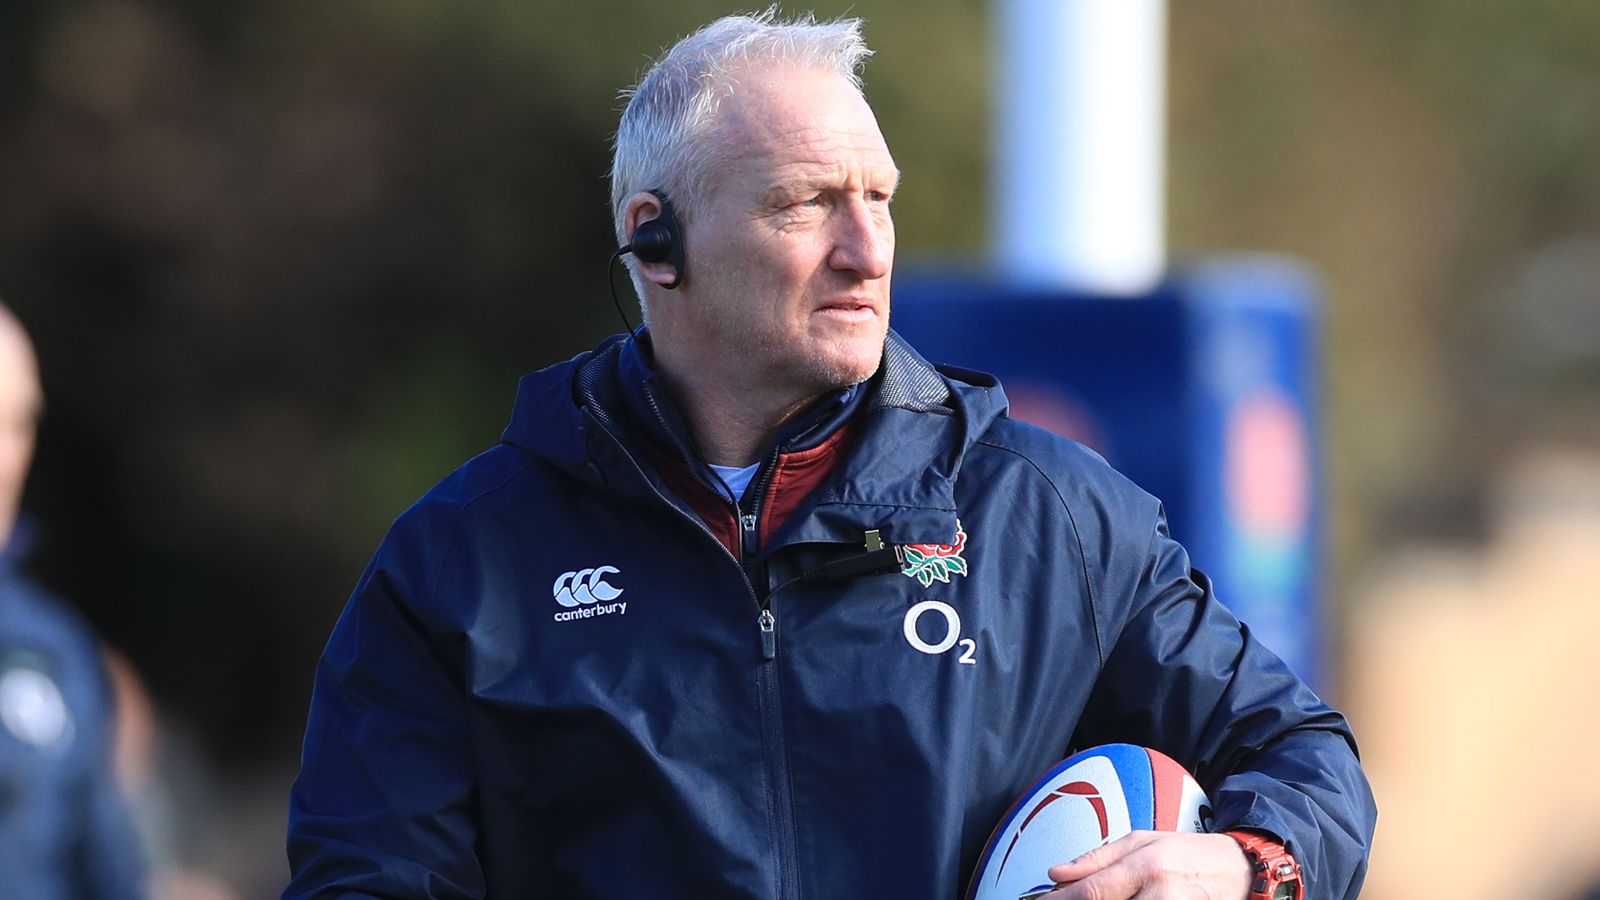 England Women boss Simon Middleton named World Rugby’s coach of the year